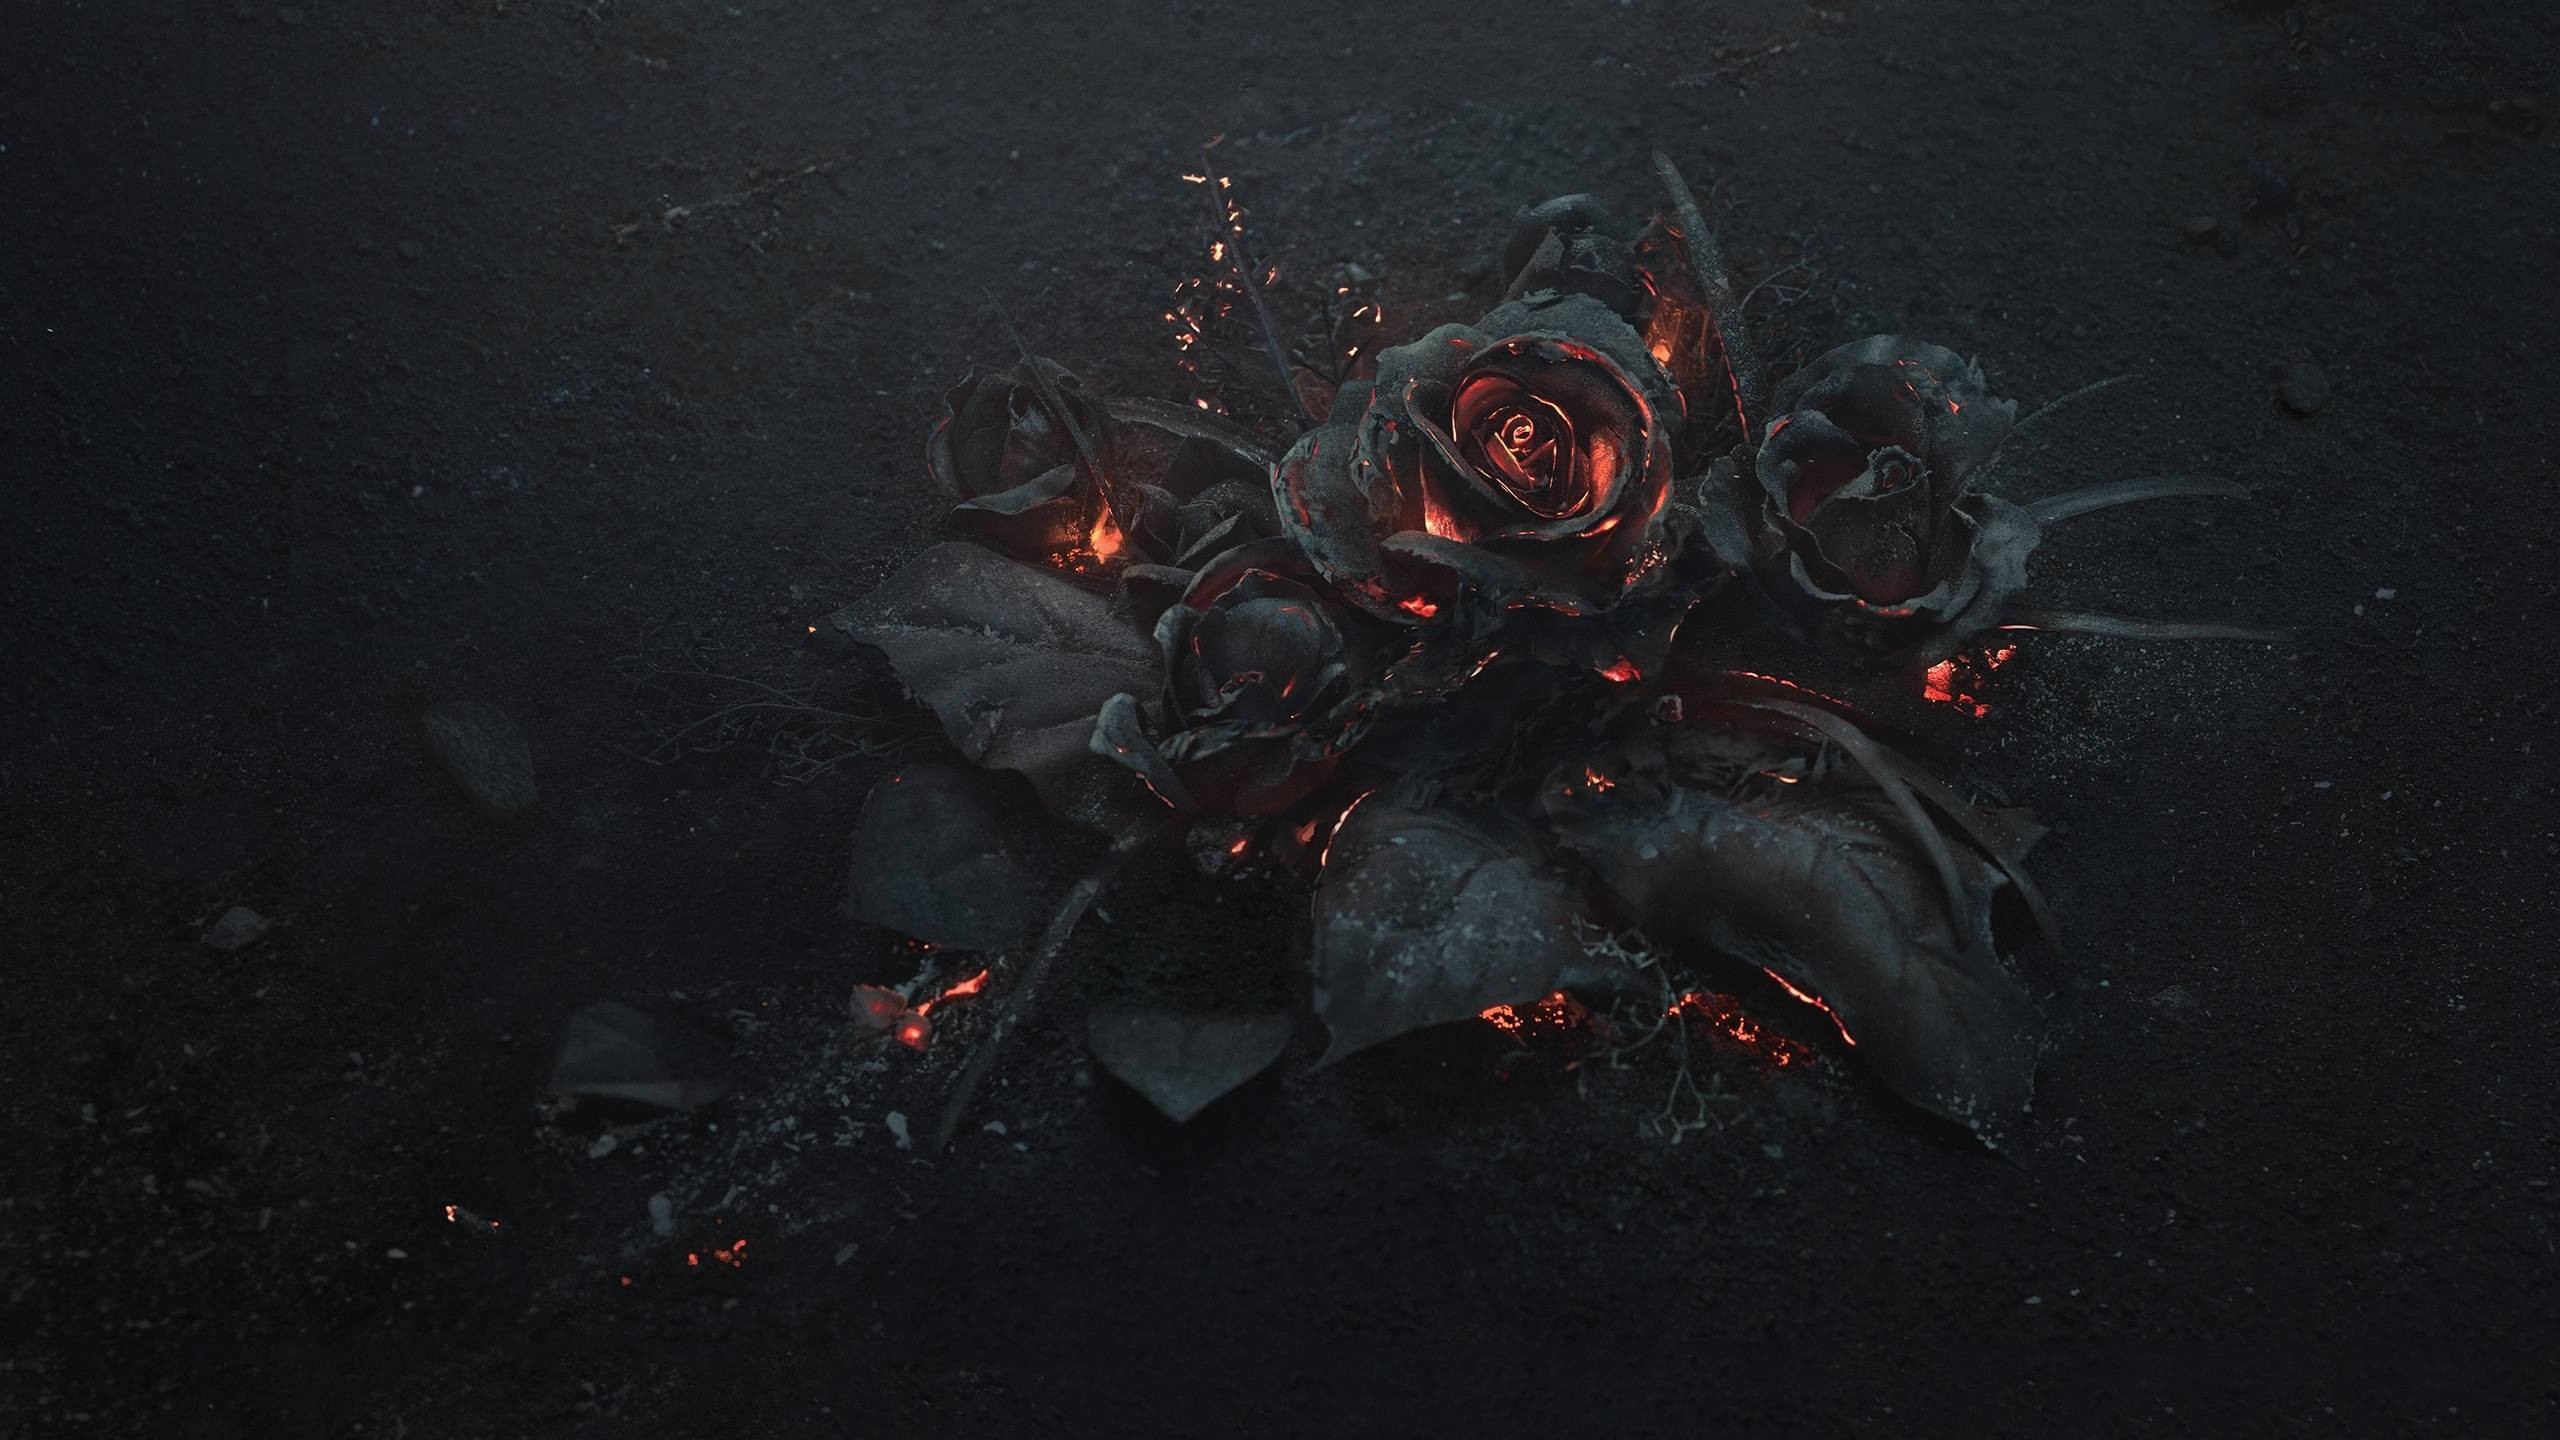 2560x1440 A Smoldering Bouquet of Roses Photographed by Ars Thanea